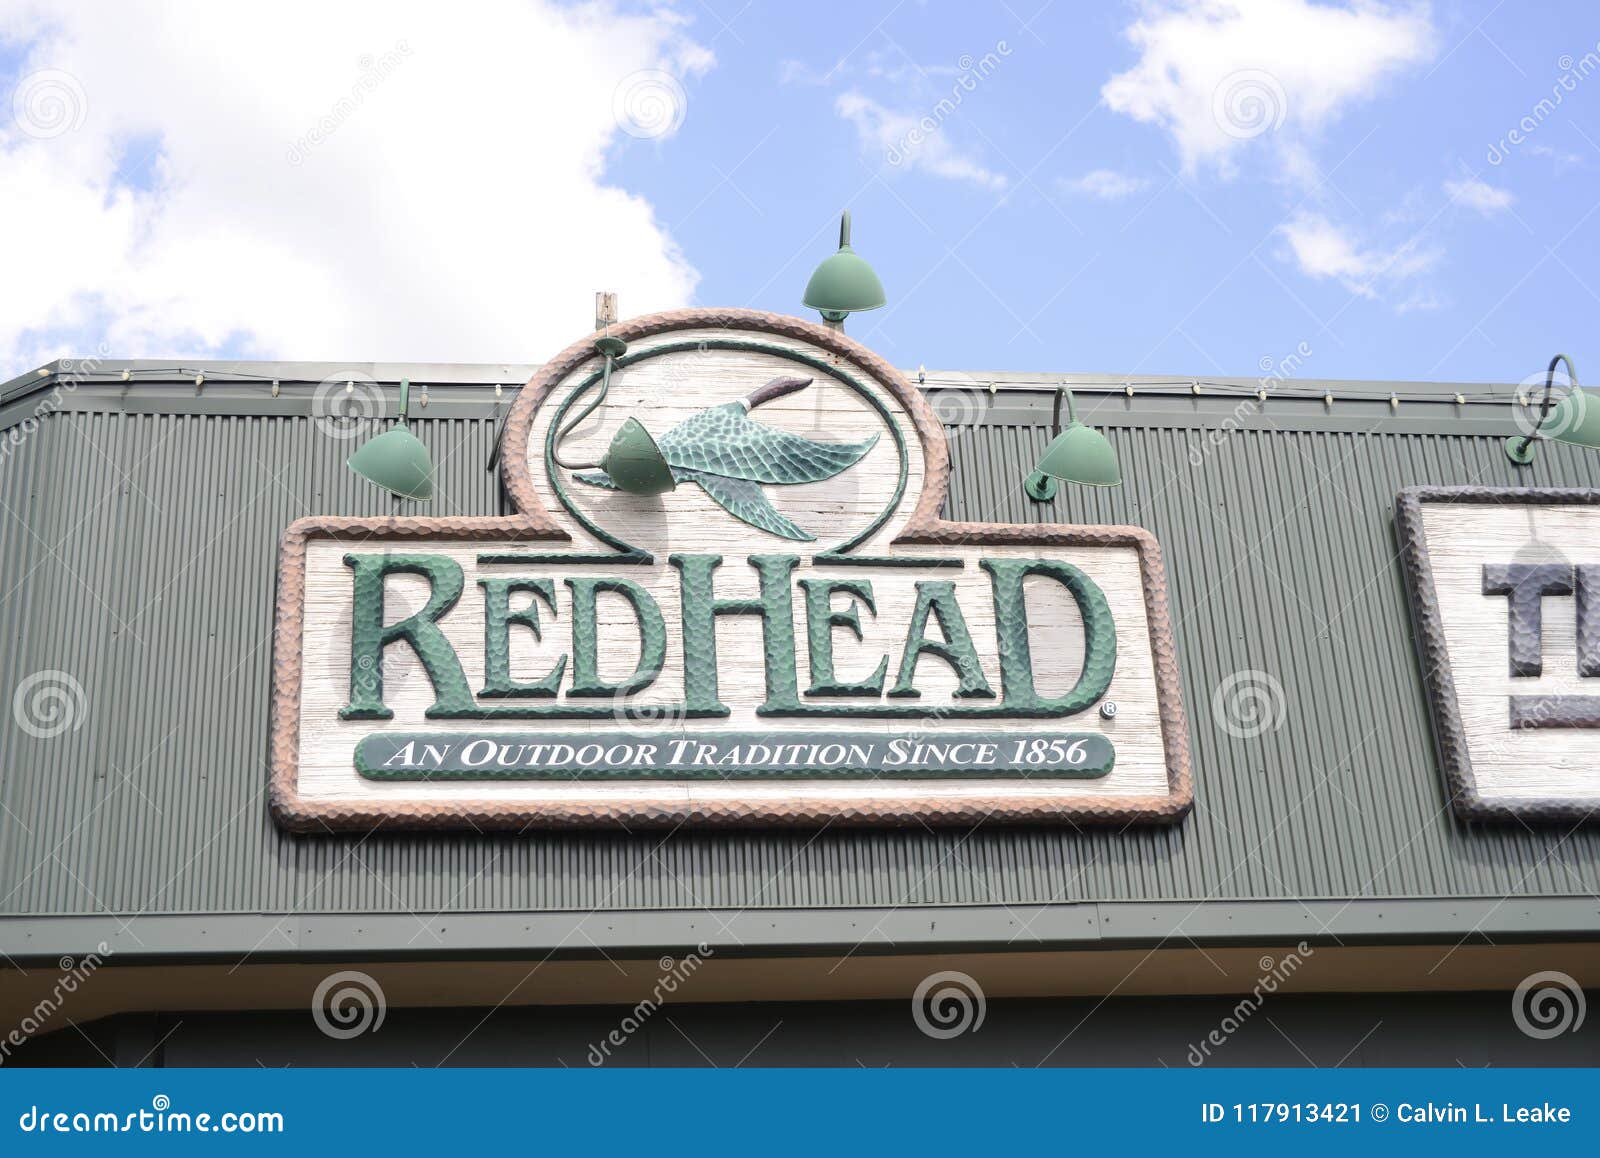 Redhead Clothing at Bass Pro Shops Editorial Photo - Image of lure, bass:  117913421